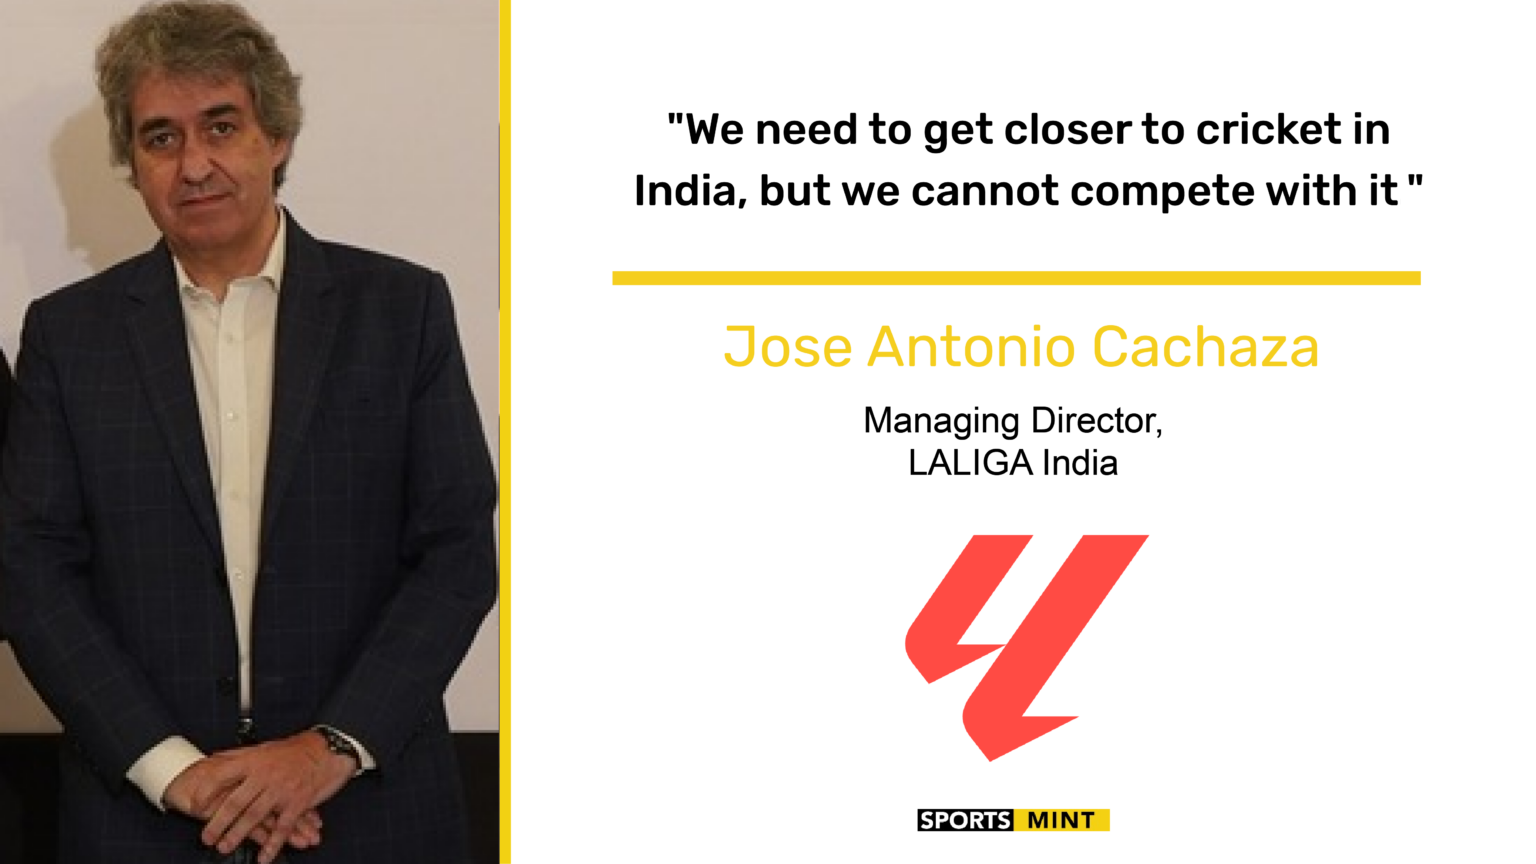 Exclusive: We need to get closer to cricket in India, but we cannot compete with it - Jose Antonio Cachaza, Managing Director, LALIGA India